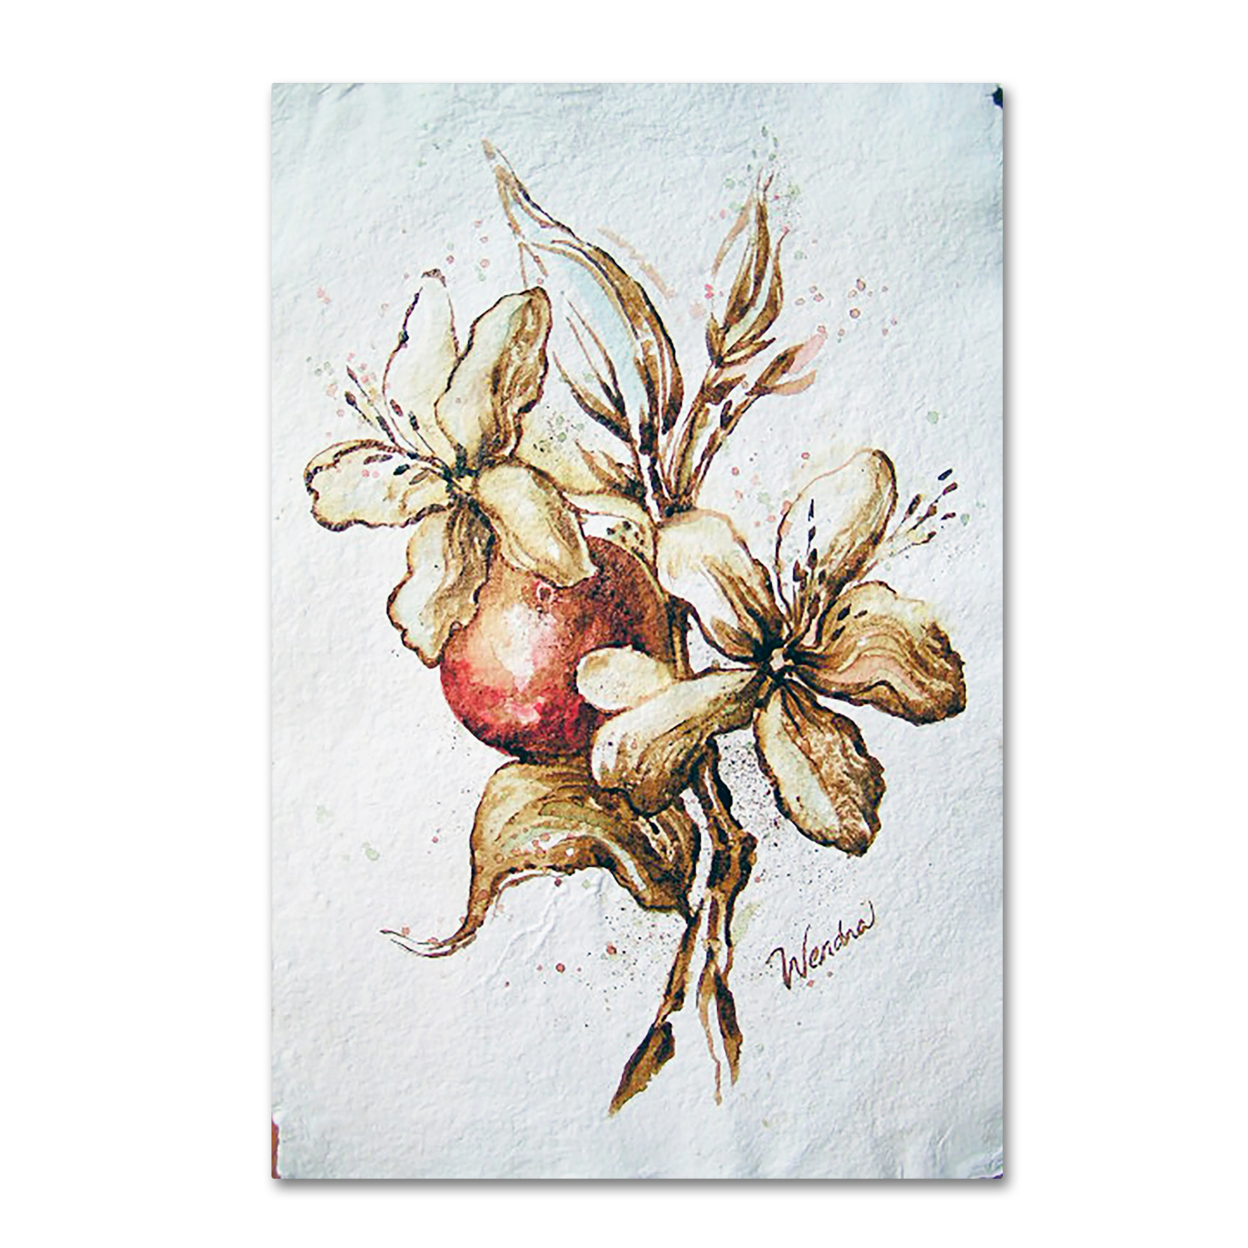 Wendra 'Coffee Flower And Bean' Canvas Art 16 X 24